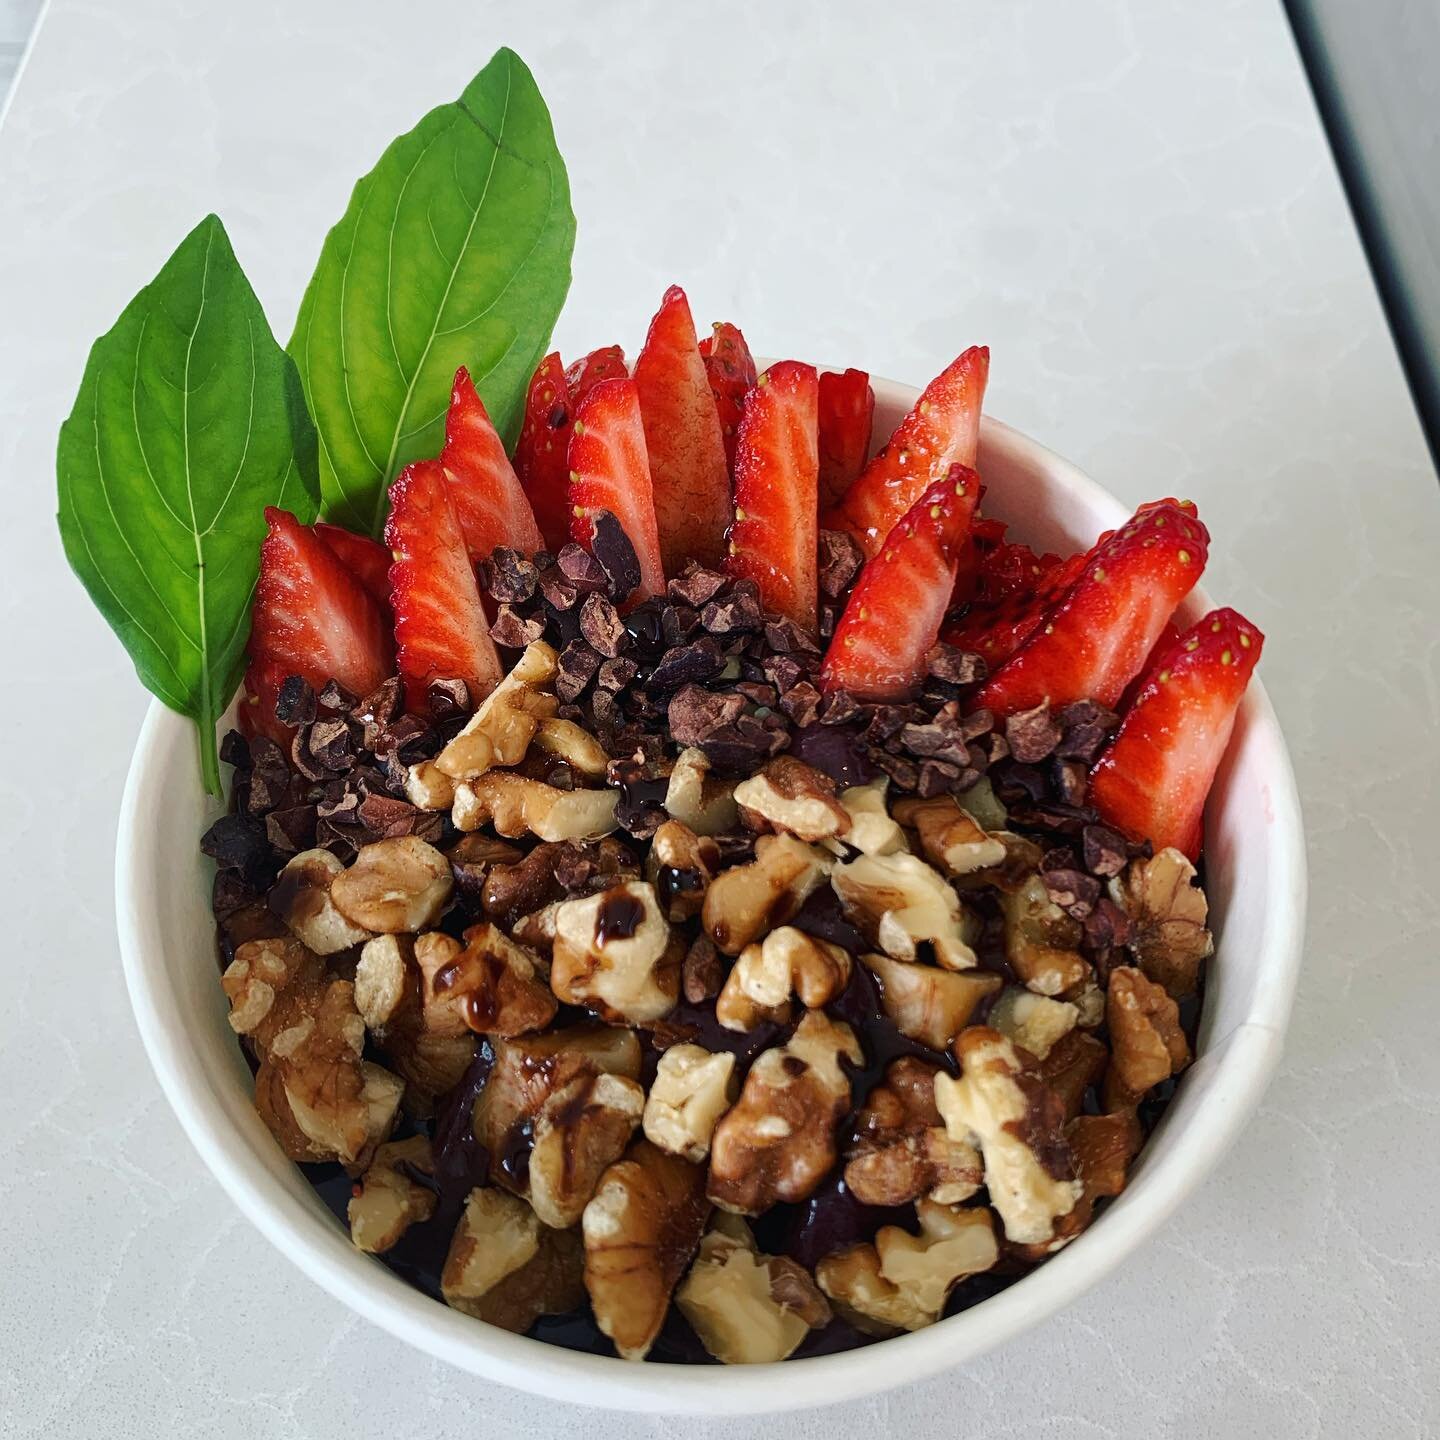 ok, this is pretty weird but just hear us out! 
✨introducing the Balsamic Basil A&ccedil;a&iacute; Bowl 

a semi-savory experiment that we feel works strangely well!  this is the classic a&ccedil;a&iacute; base with basil blended in, topped with waln